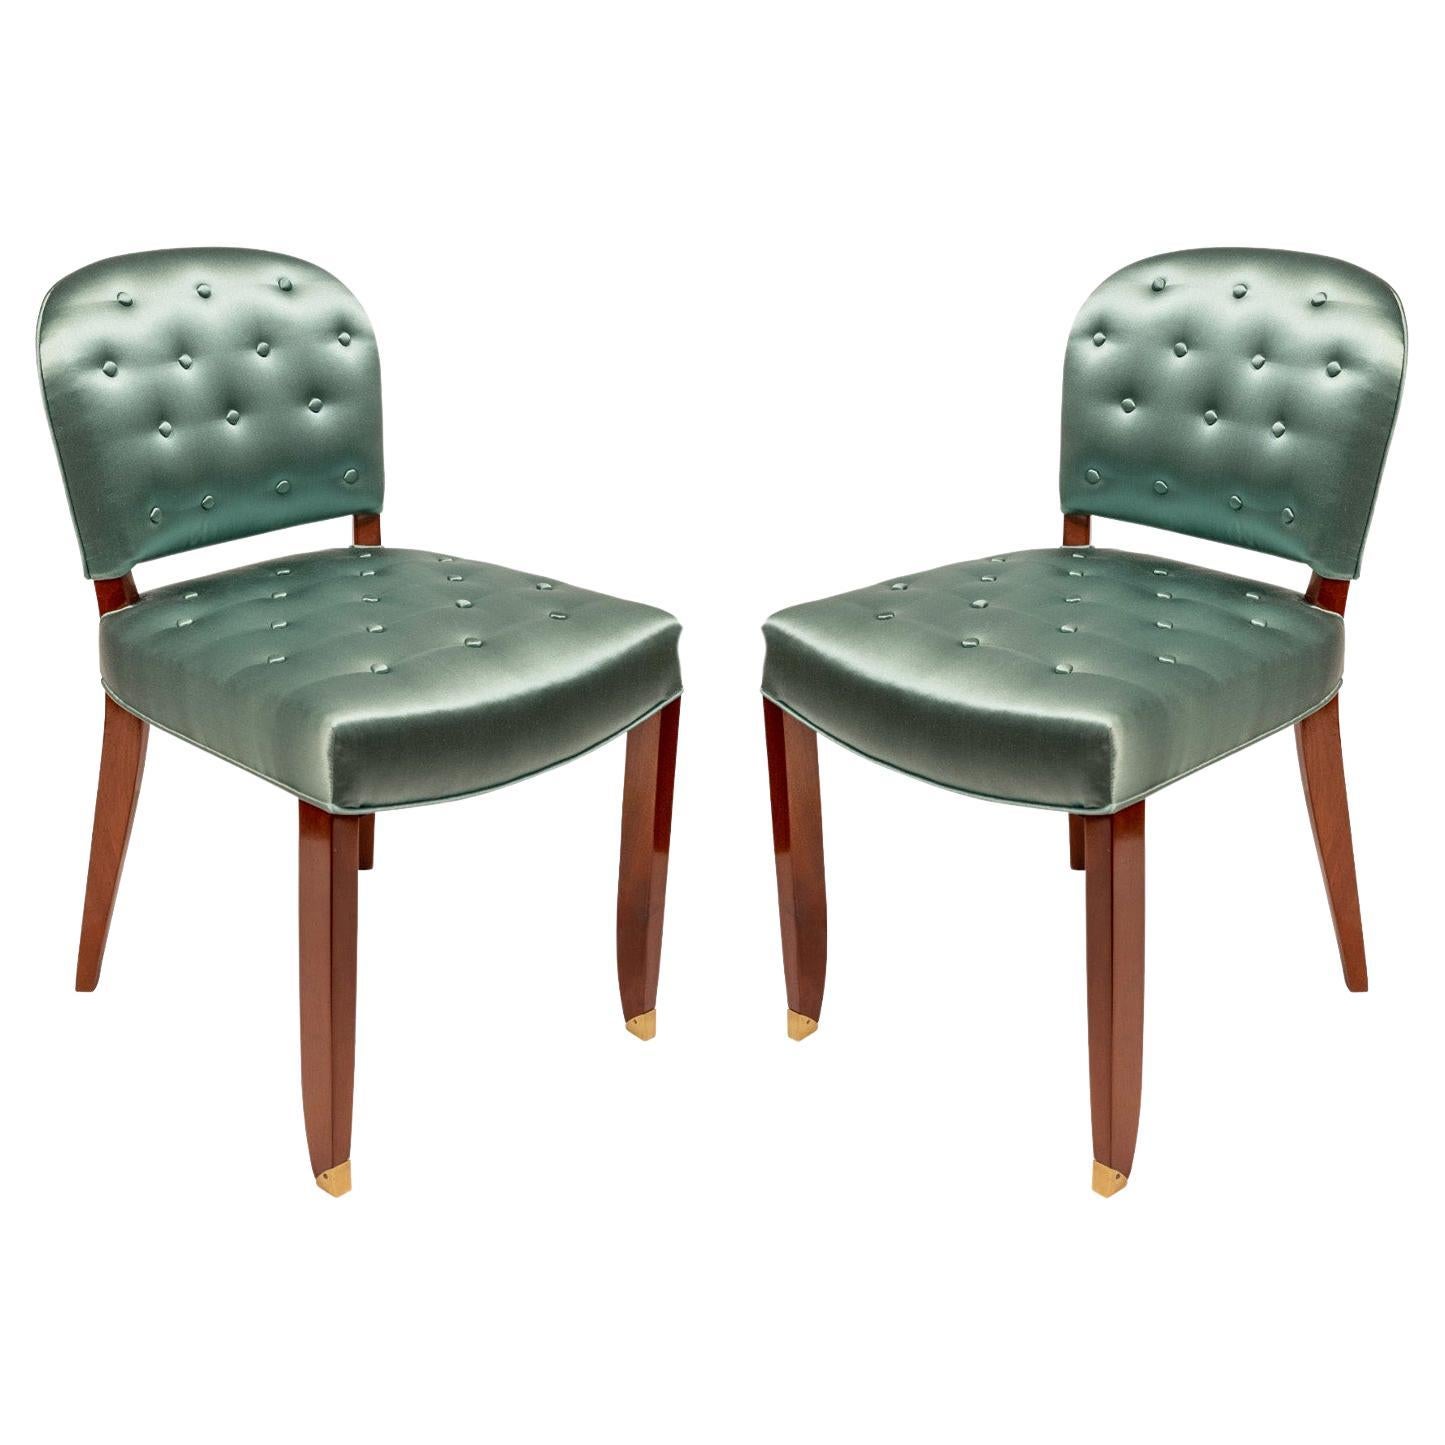 Jules Leleu Pair of Art Deco Side Chairs in Green Sateen 1950s 'Each Numbered'